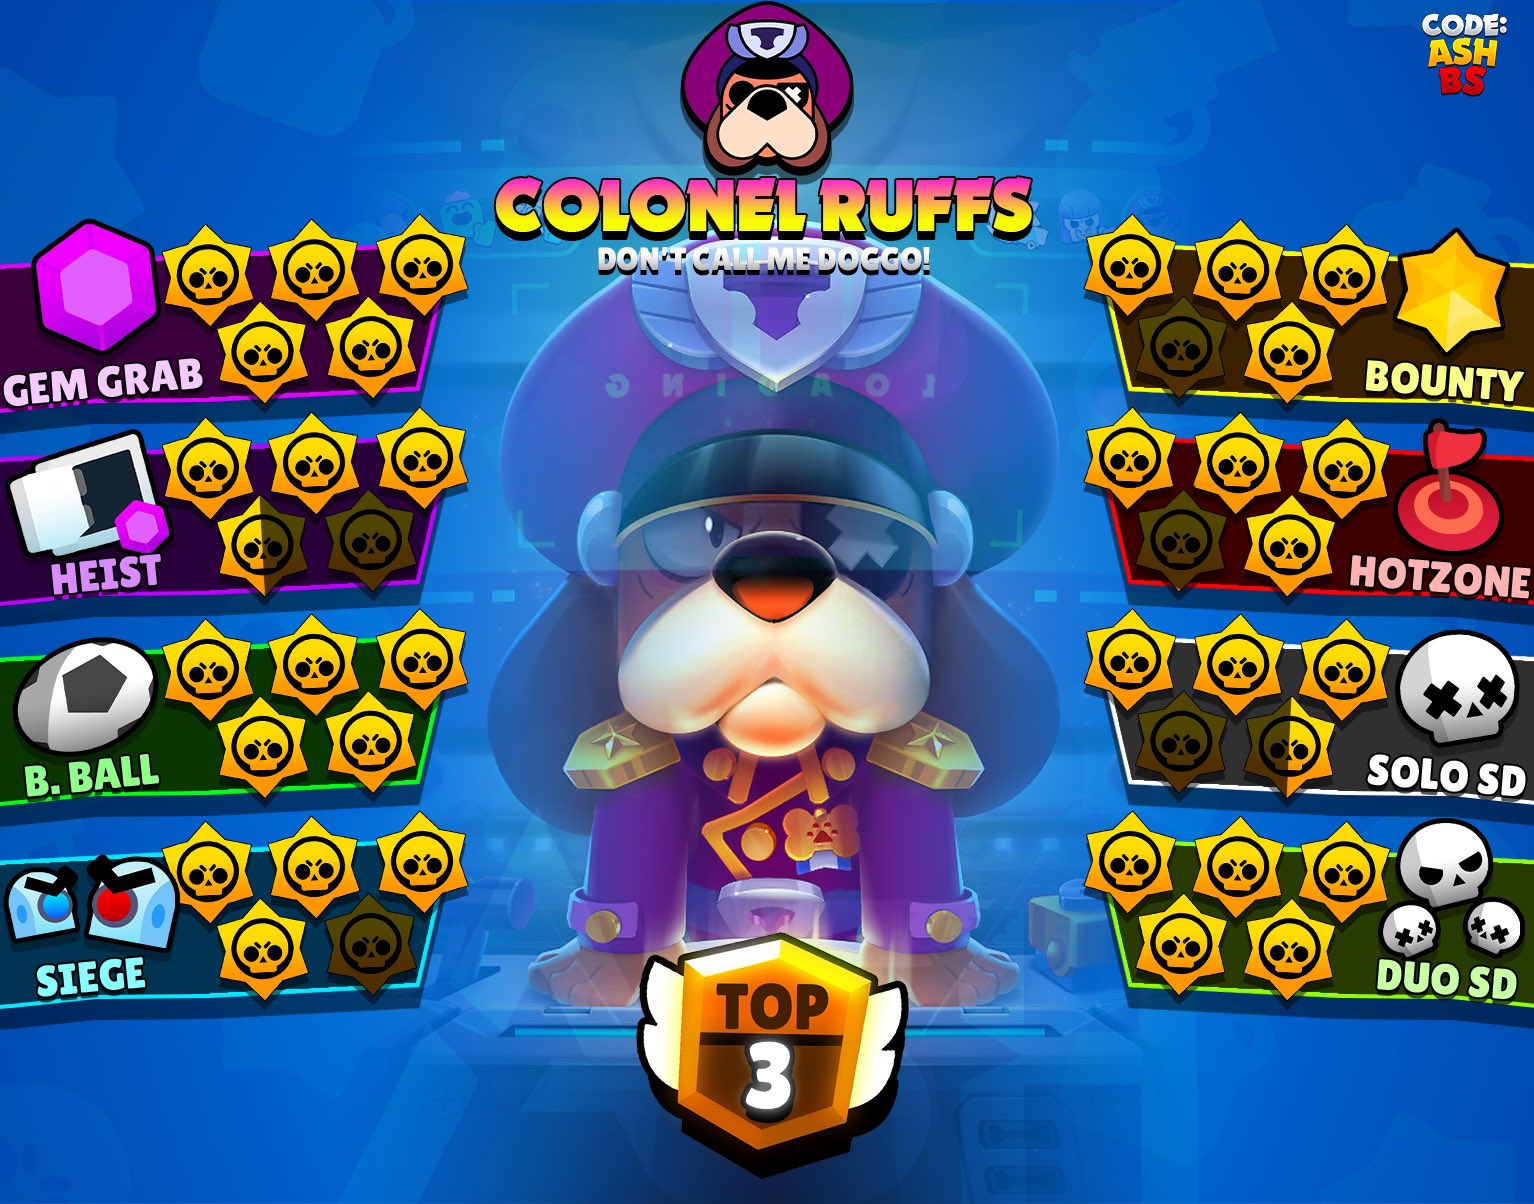 Code Ashbs On Twitter Colonel Ruffs Tier List For All Game Modes And Some Of The Best Maps To Use Him In With Suggested Comps He S One Of The Best Brawlers Right - colenel ruff brawl stars